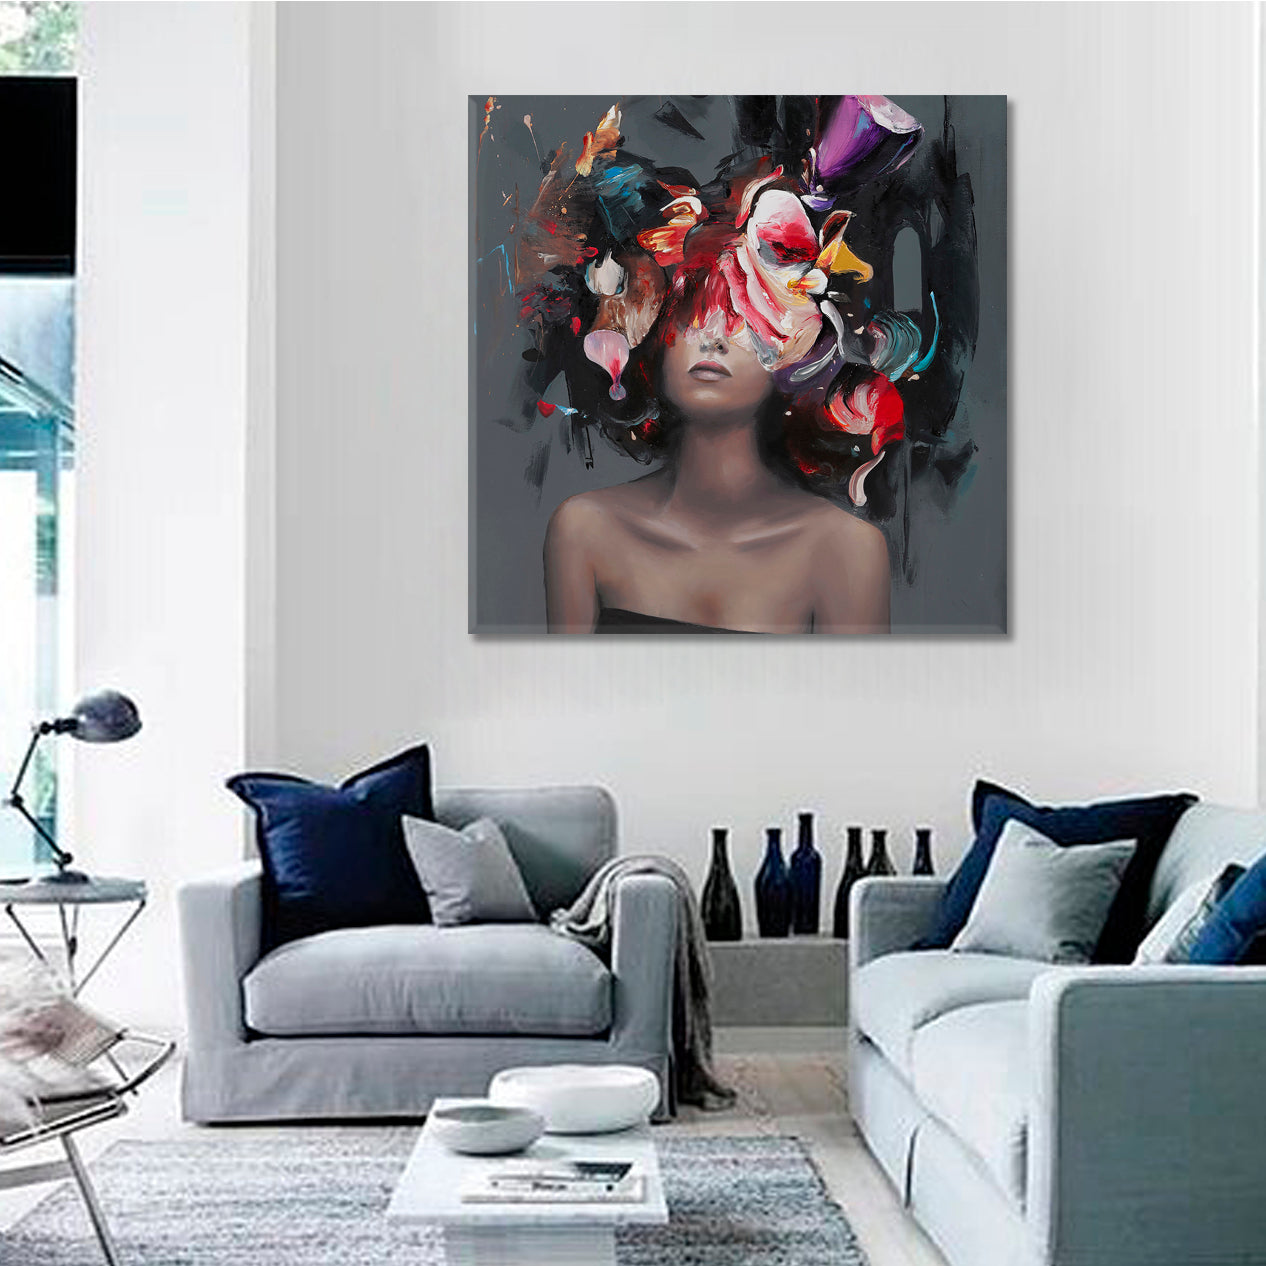 MUST FLY Woman And Flowers Paint Abstract Contemporary Art - Square Panel Fine Art Artesty   